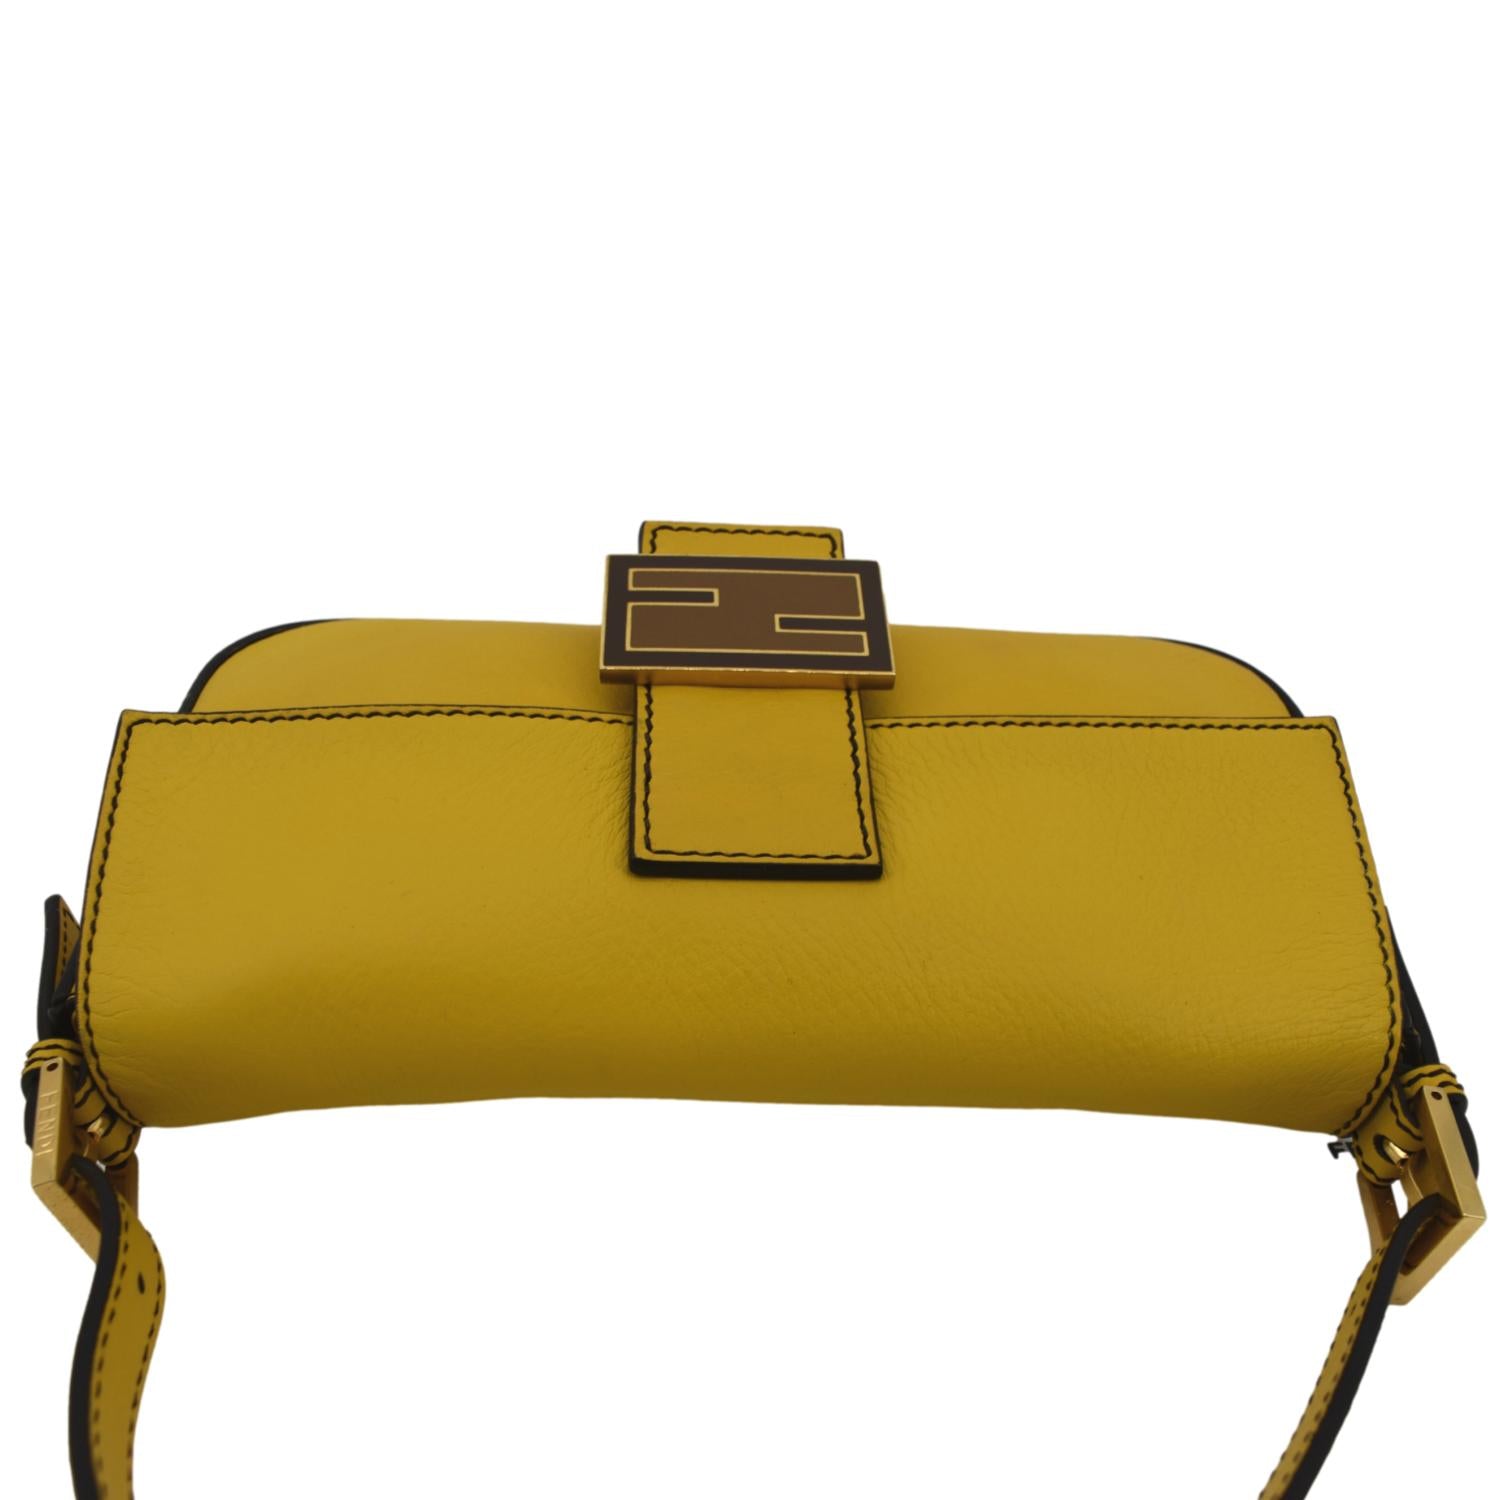 Fendi - Authenticated Baguette Convertible Bag - Leather Yellow Plain For Man, Very Good condition